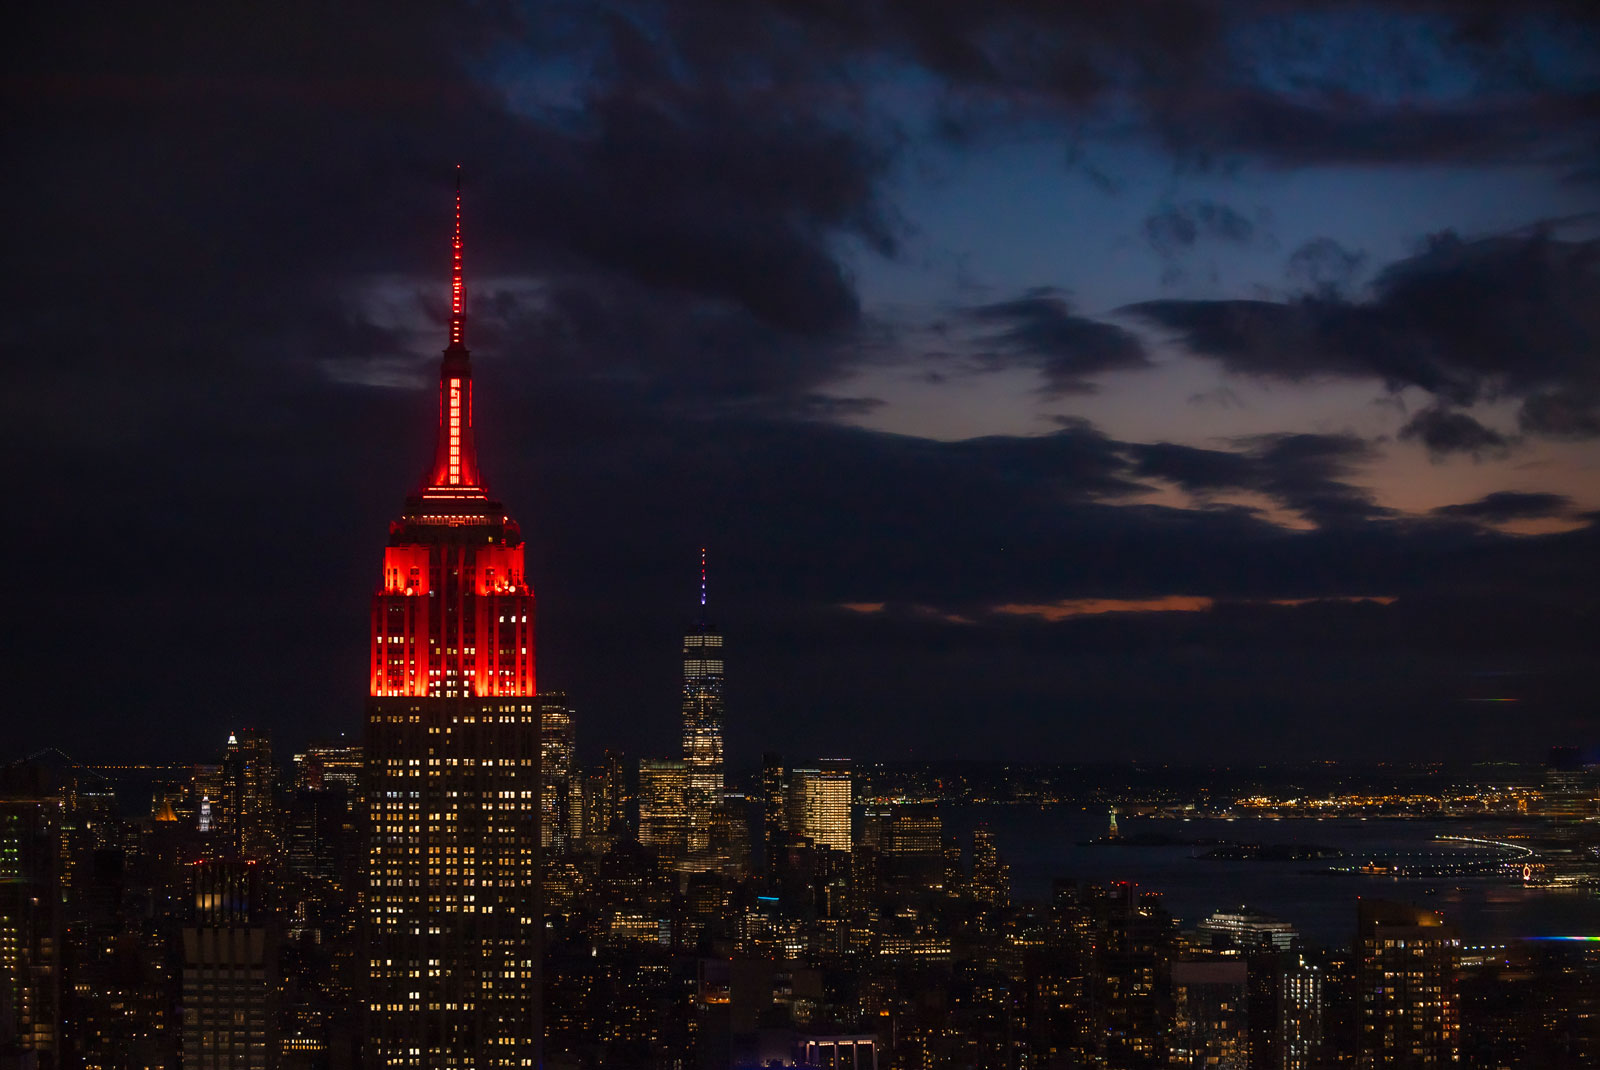 Empire State Building in New York began lighting its tower red on Tuesday, Feb. 16, starting at sunset.